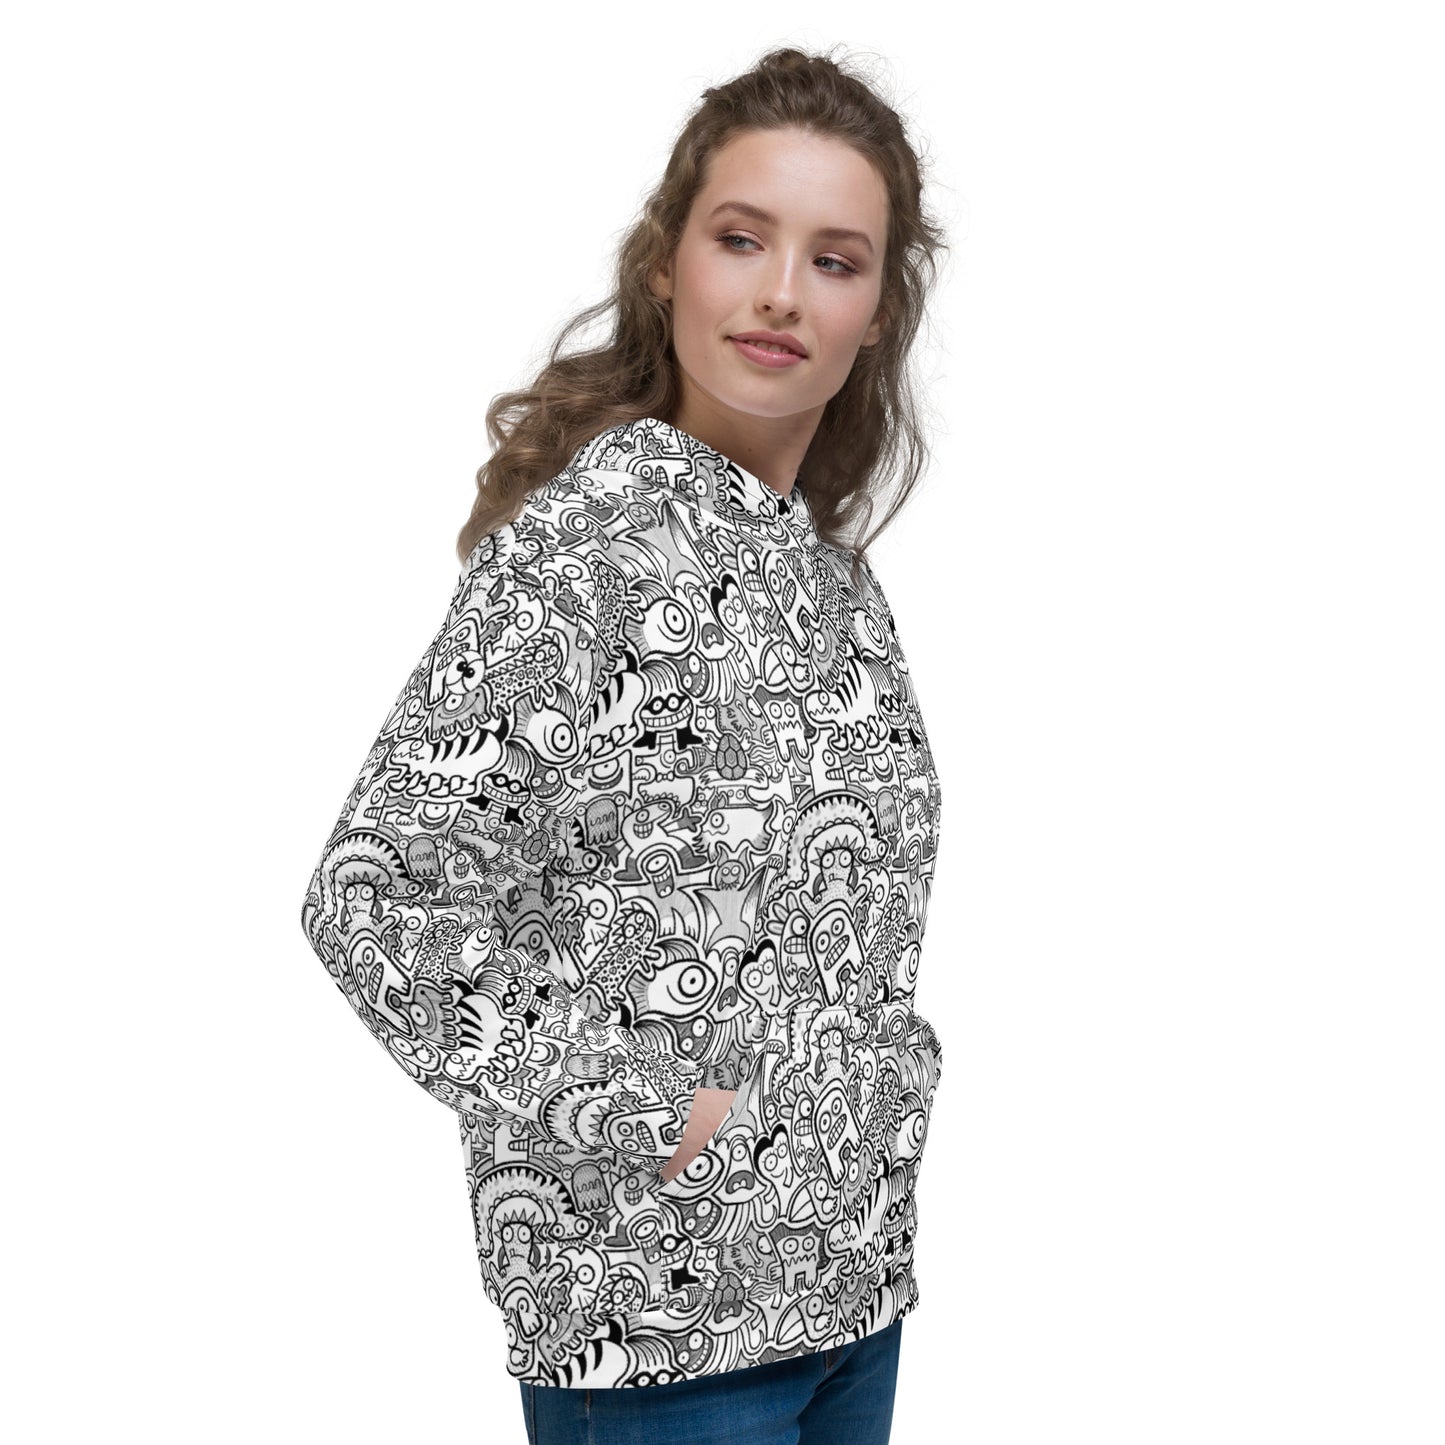 Fill your world with cool doodles Unisex Hoodie. Beautiful woman wearing All-over print Hoodie by Zoo&co